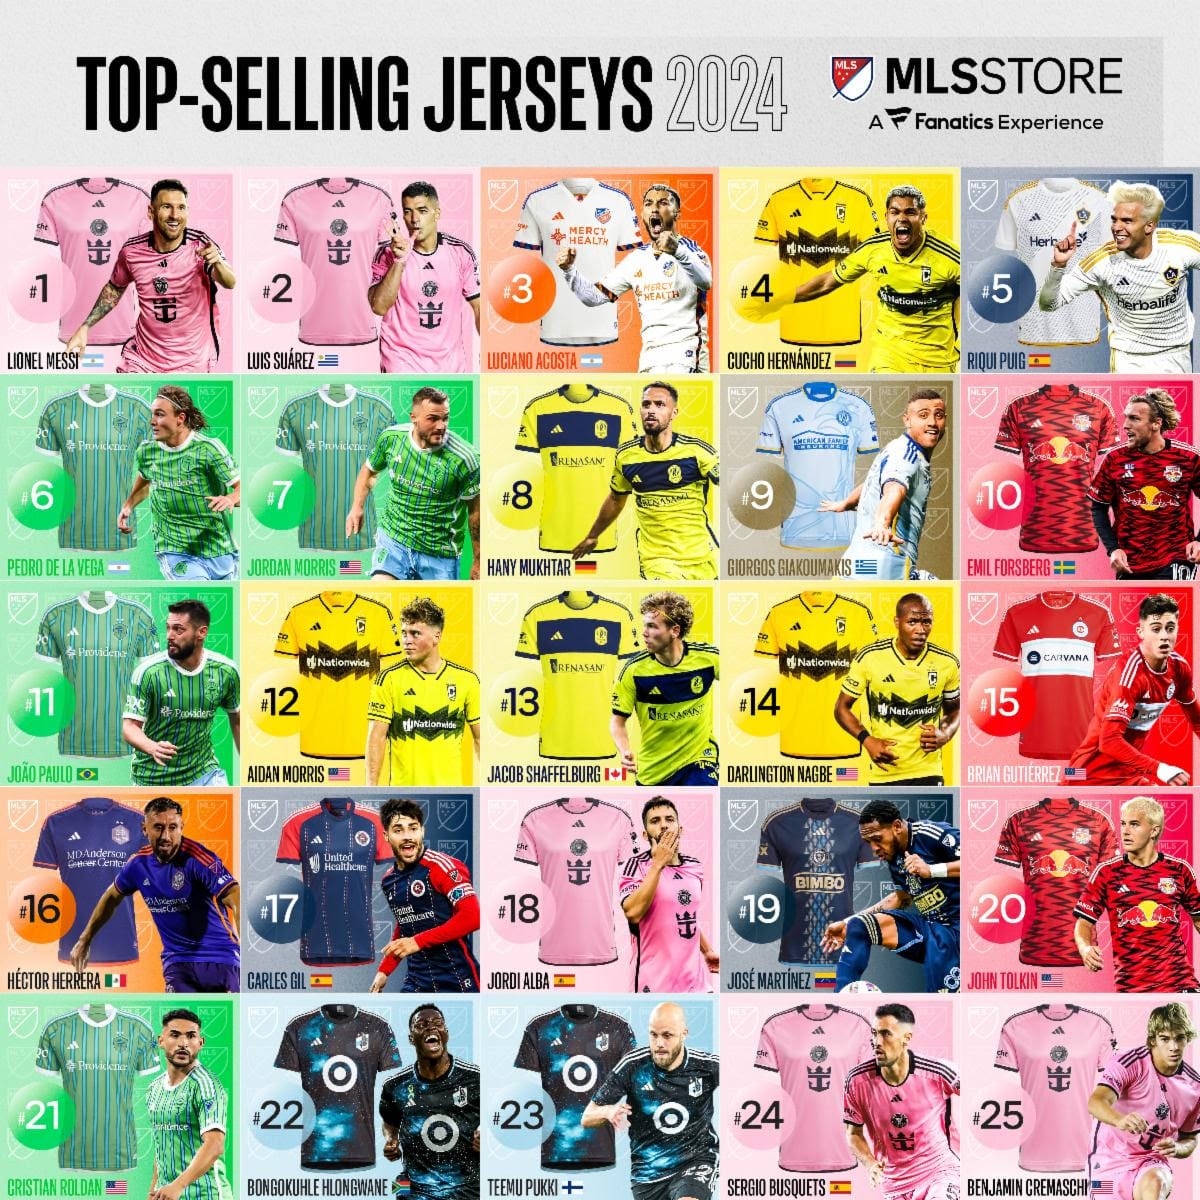 A graphic from MLS listing the top 25 players for jersey sales, along with their picture and nationality.